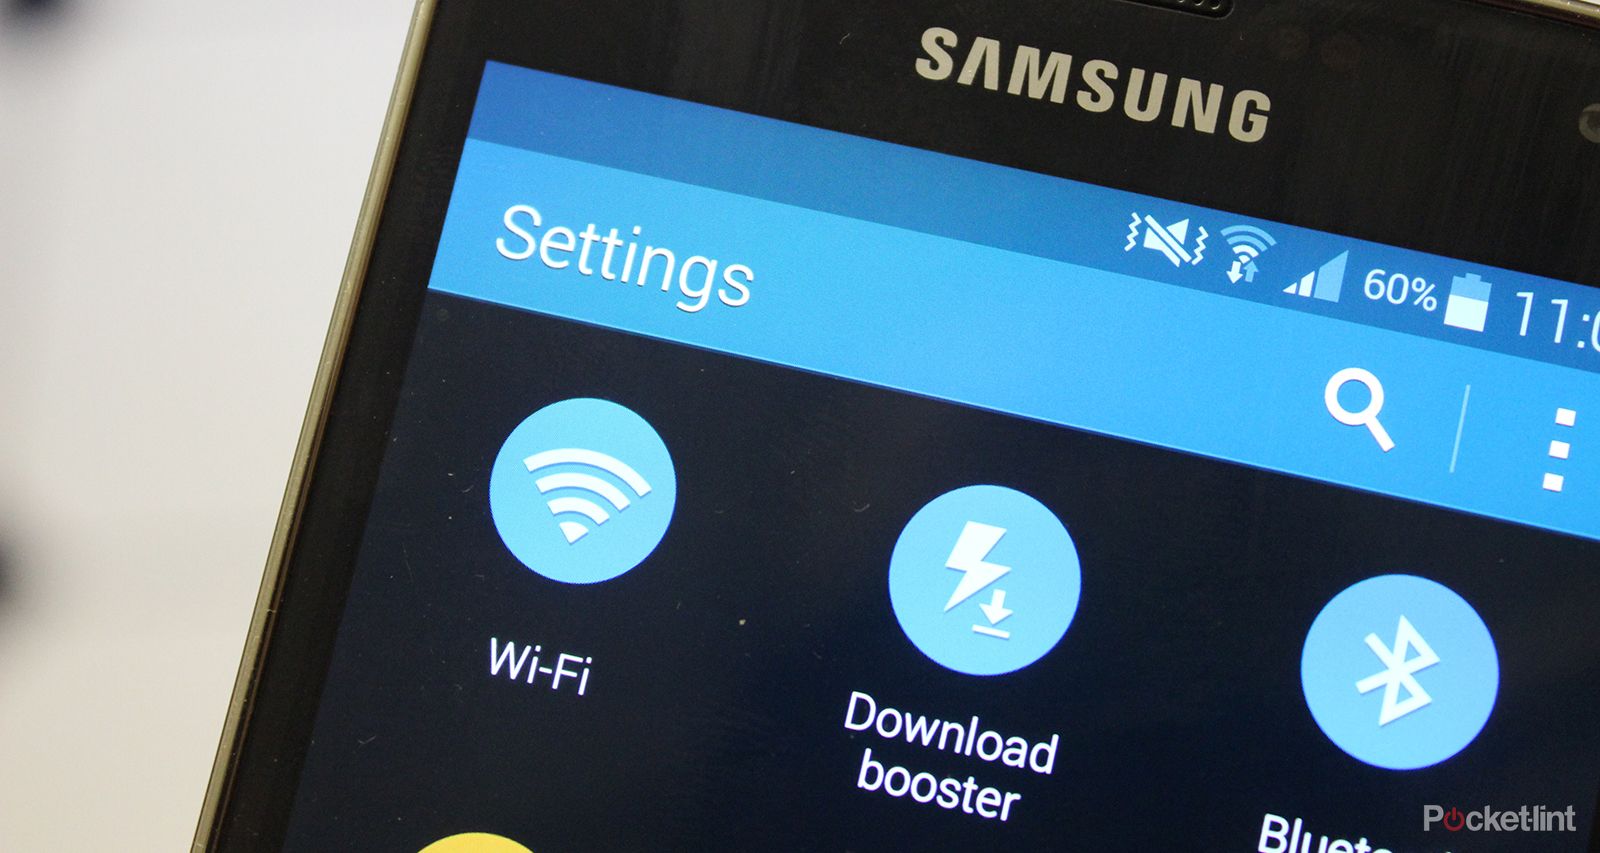 samsung’s wi fi is going to be five times faster meaning a movie download per second image 1